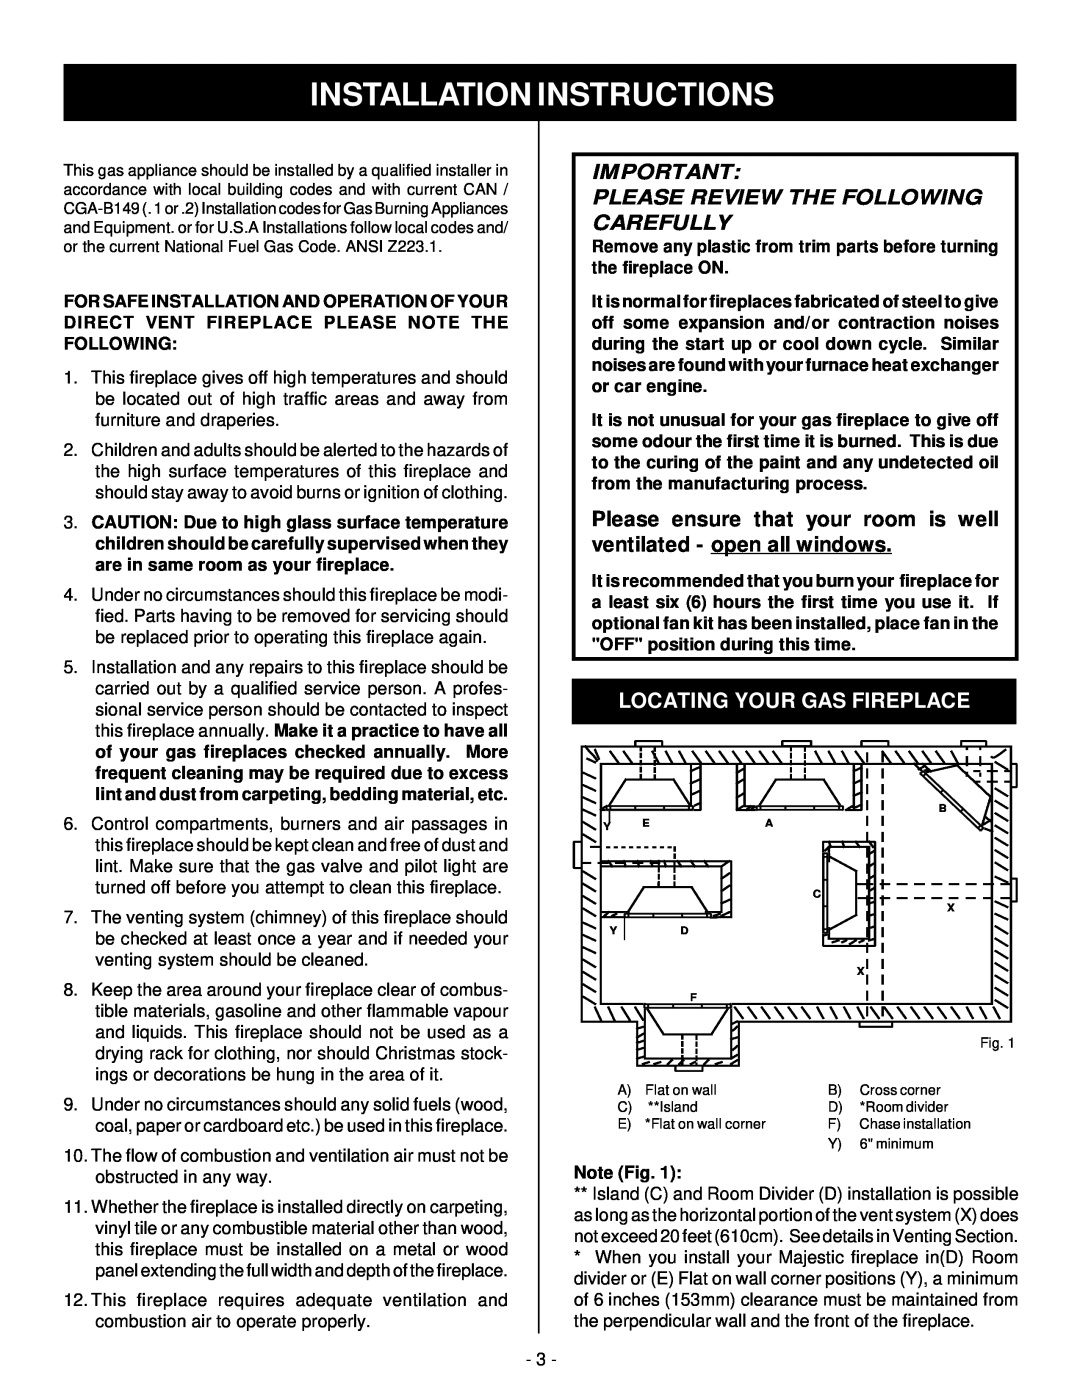 Vermont Casting DBR39 Installation Instructions, Please ensure that your room is well, ventilated - open all windows 